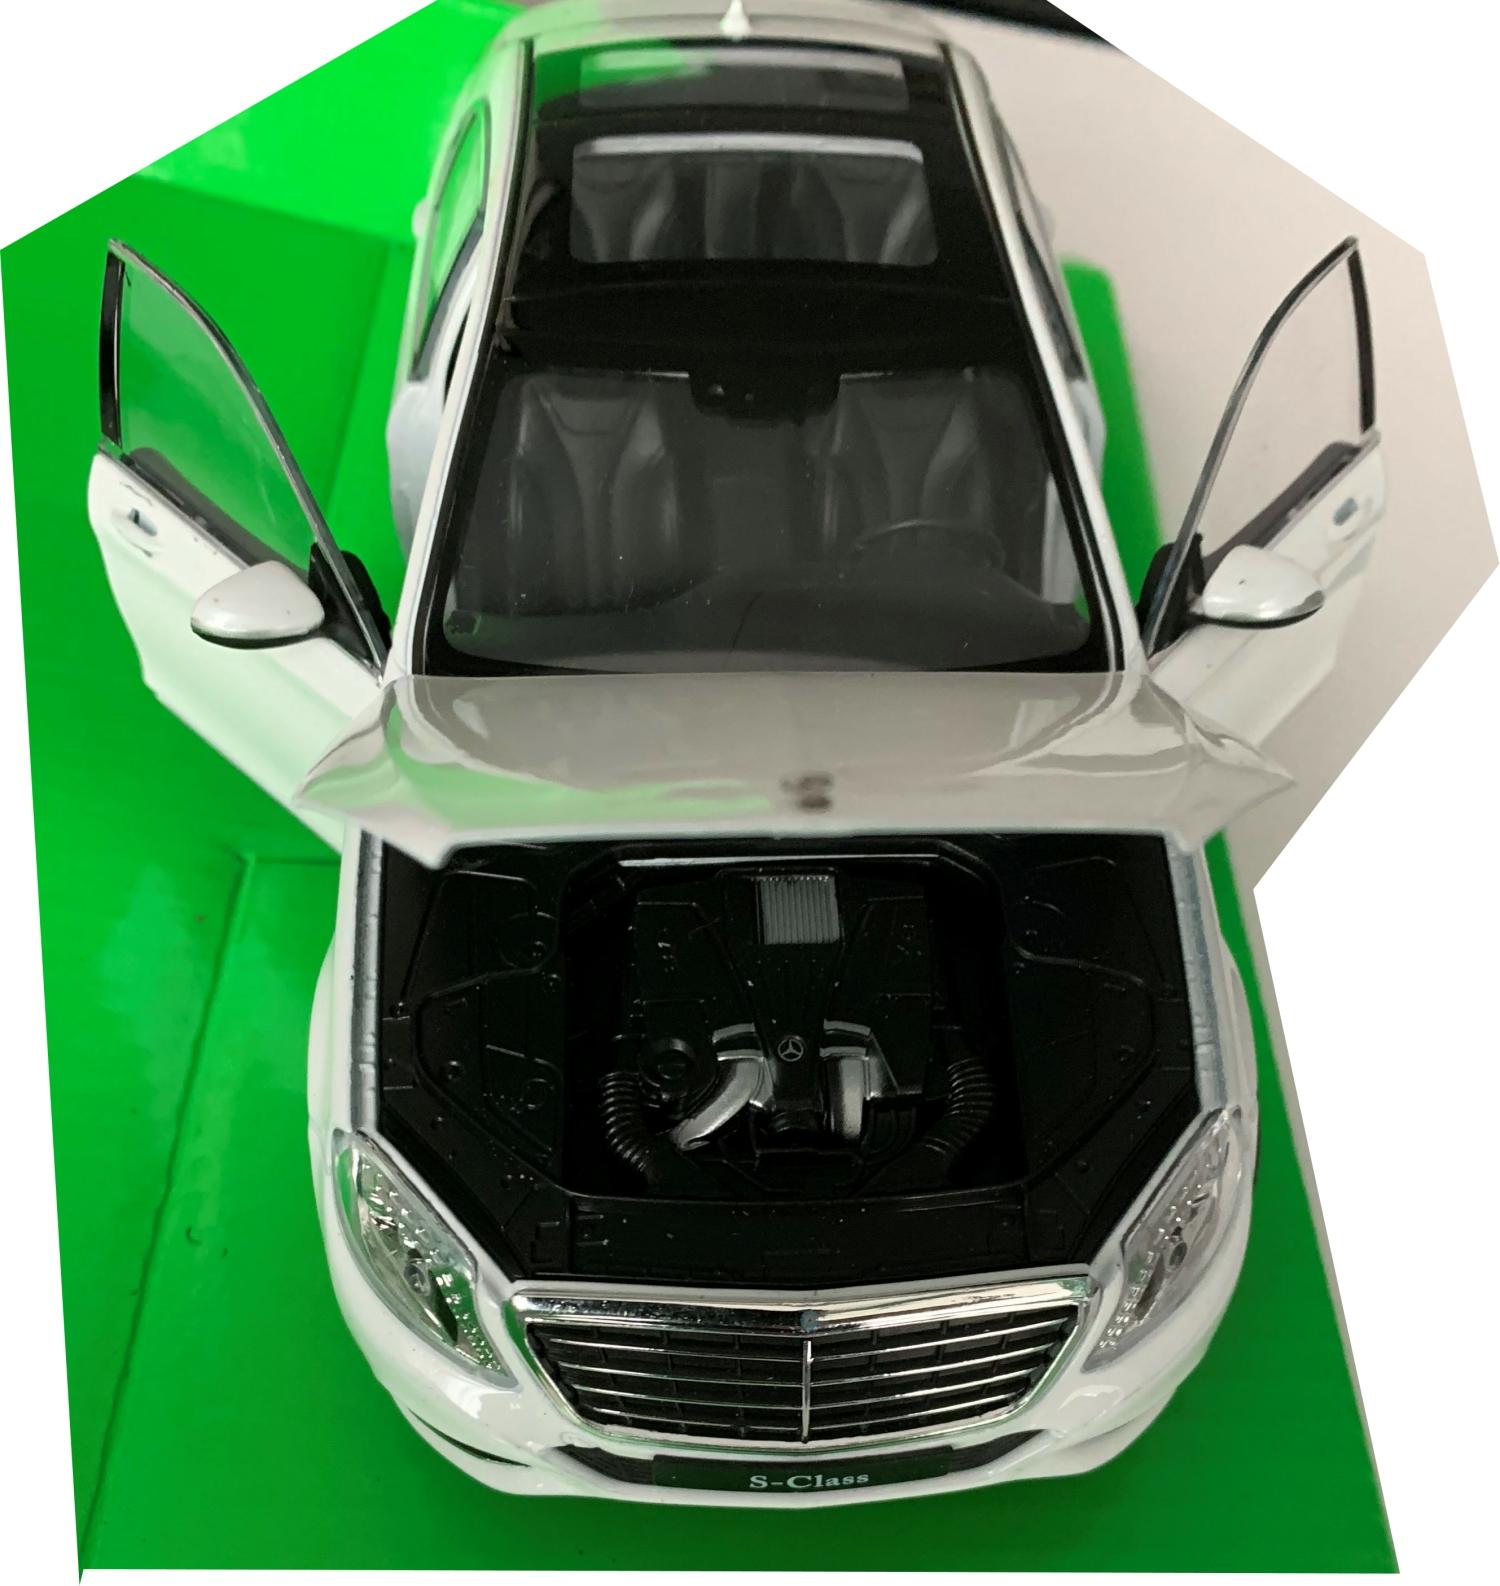 Mercedes Benz S Class 2013 in white 1:24 scale model from Welly